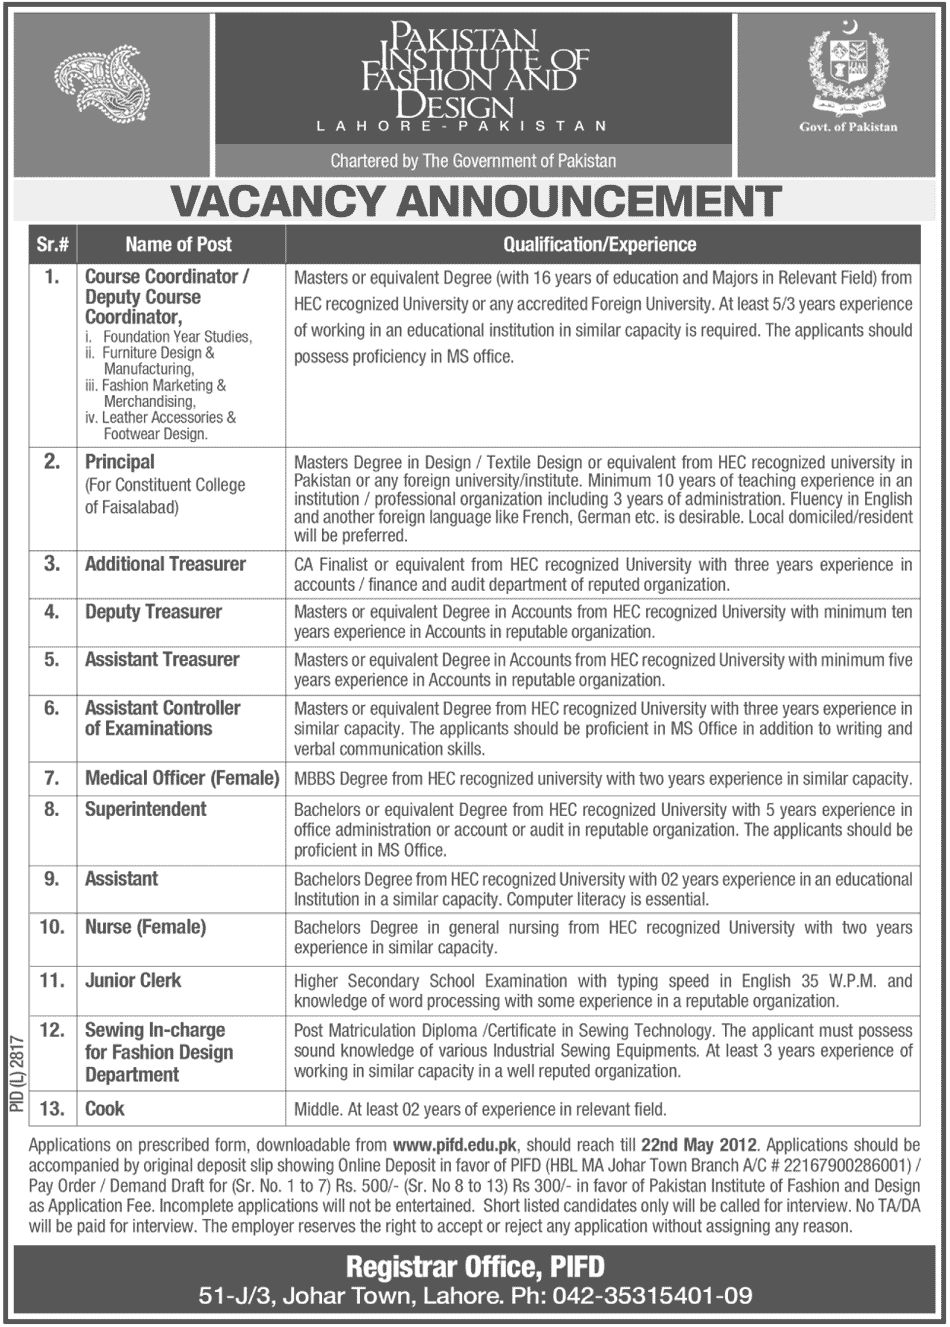 Situations Vacant at Pakistan Institute of Fashion and Design (Govt. job)